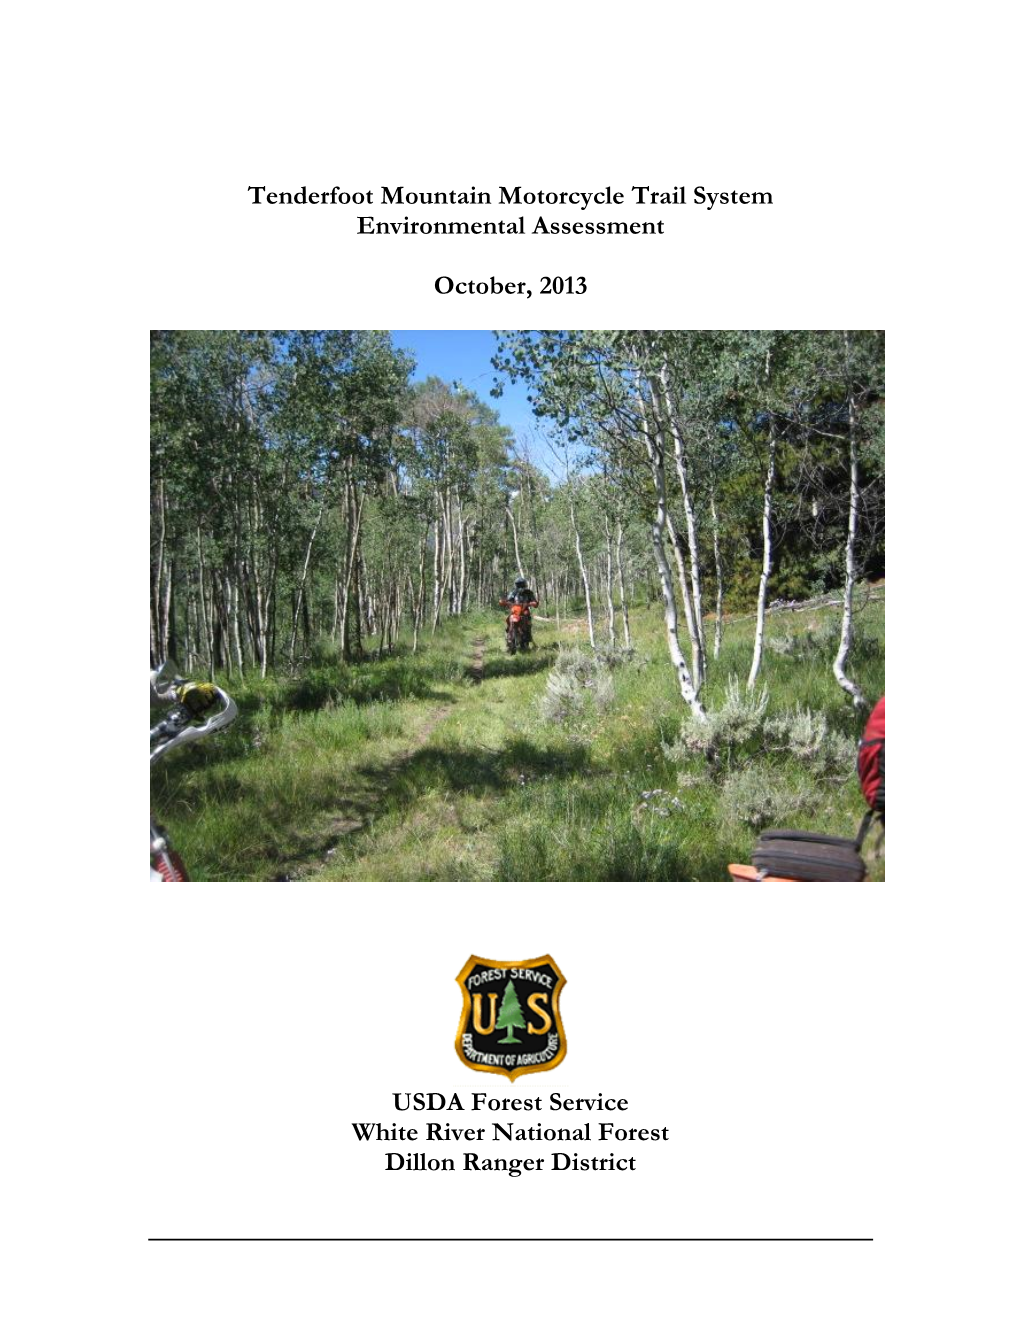 Tenderfoot Trail System